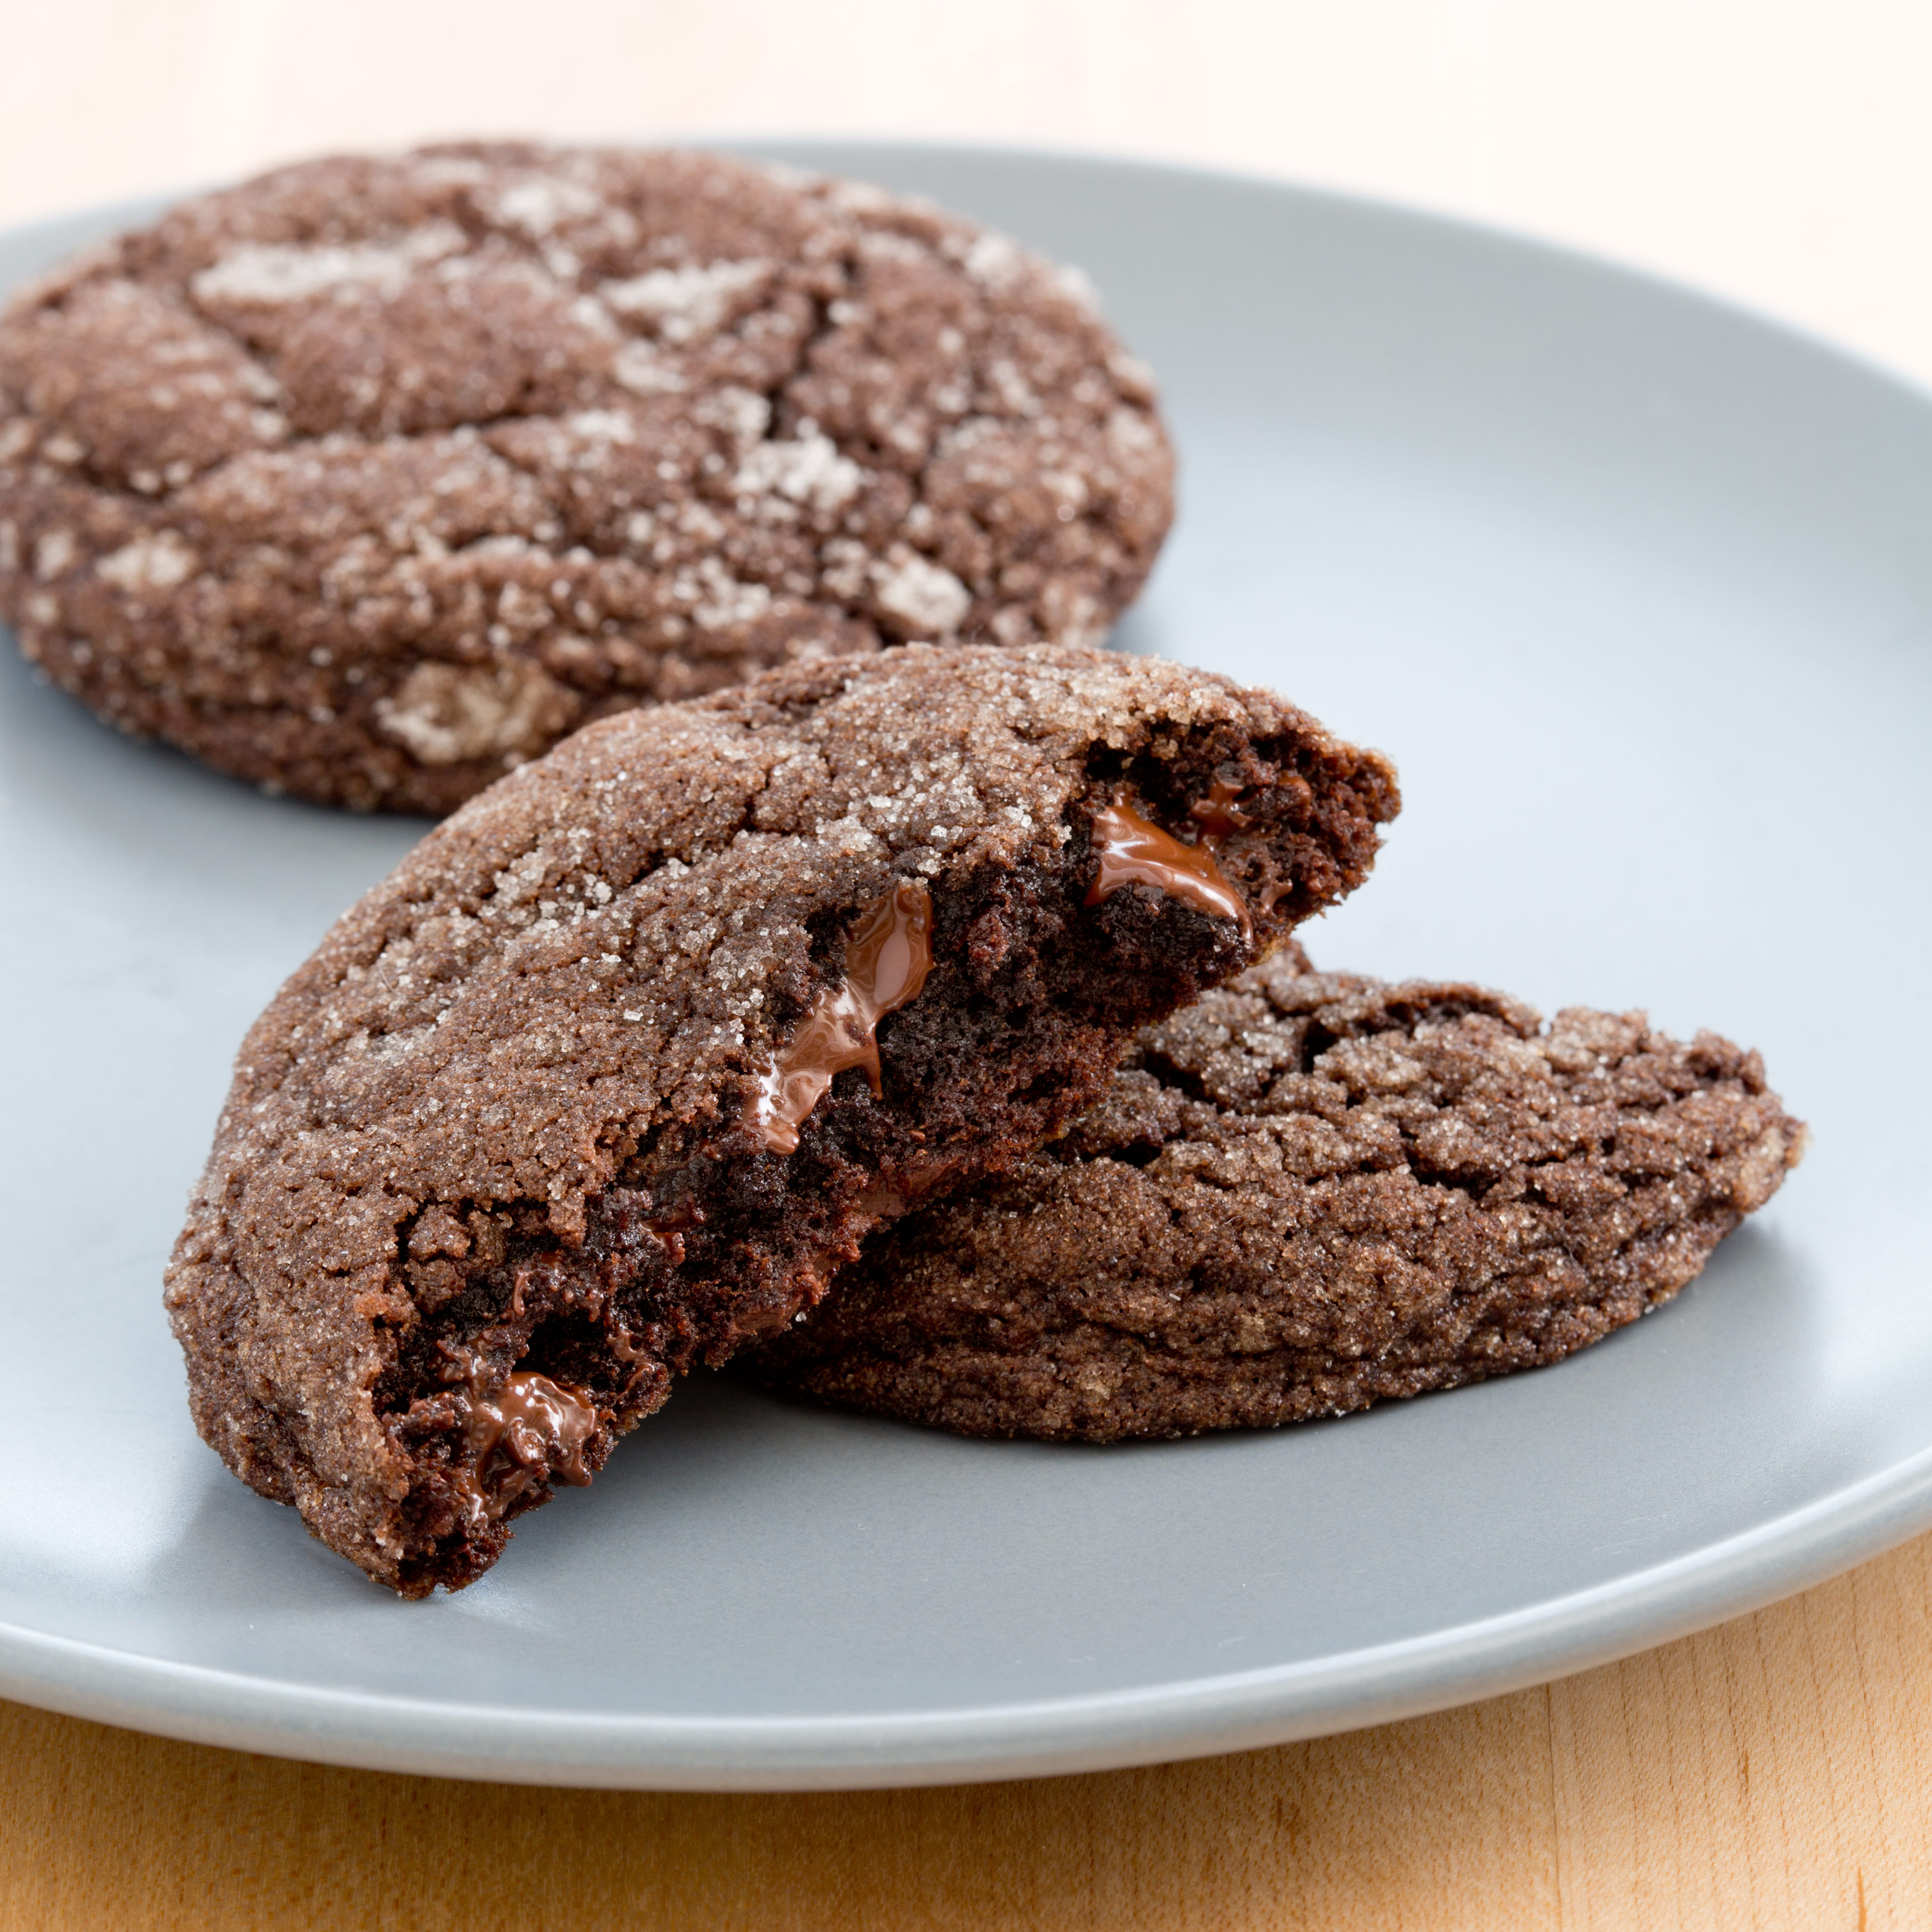 https://res.cloudinary.com/hksqkdlah/image/upload/25882_sfs-chewy-chocolate-cookies-008.jpg